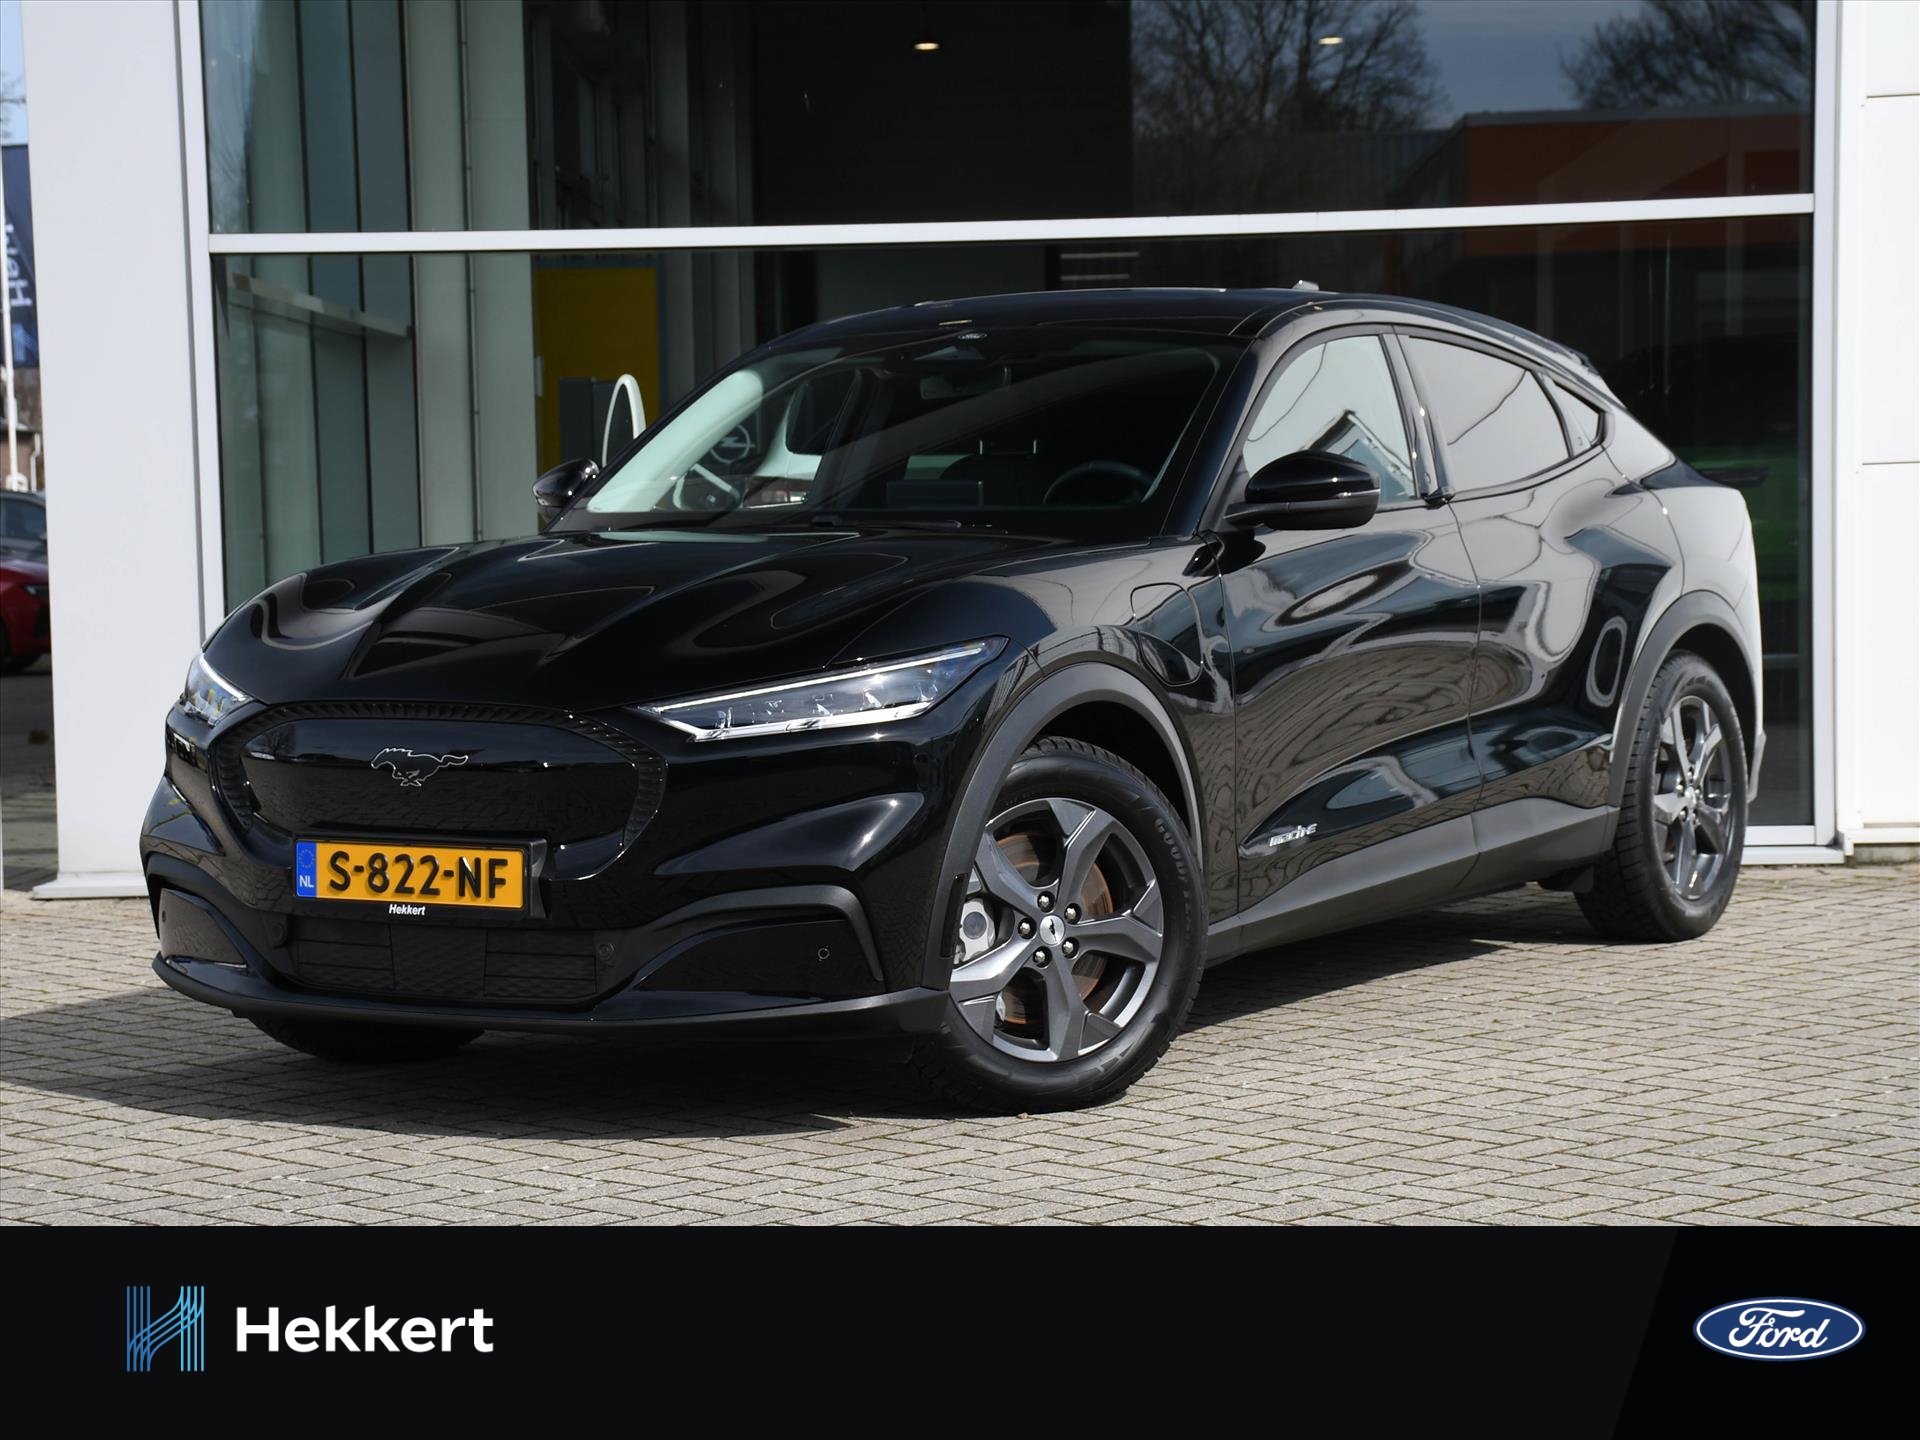 Ford Mustang Mach-E 75kWh 258pk RWD Automaat PDC + CAM. | ADAPT. CRUISE | 18'' LM | DODE HOEK | KEYLESS | APPLE-CARPLAY | DAB bij viaBOVAG.nl